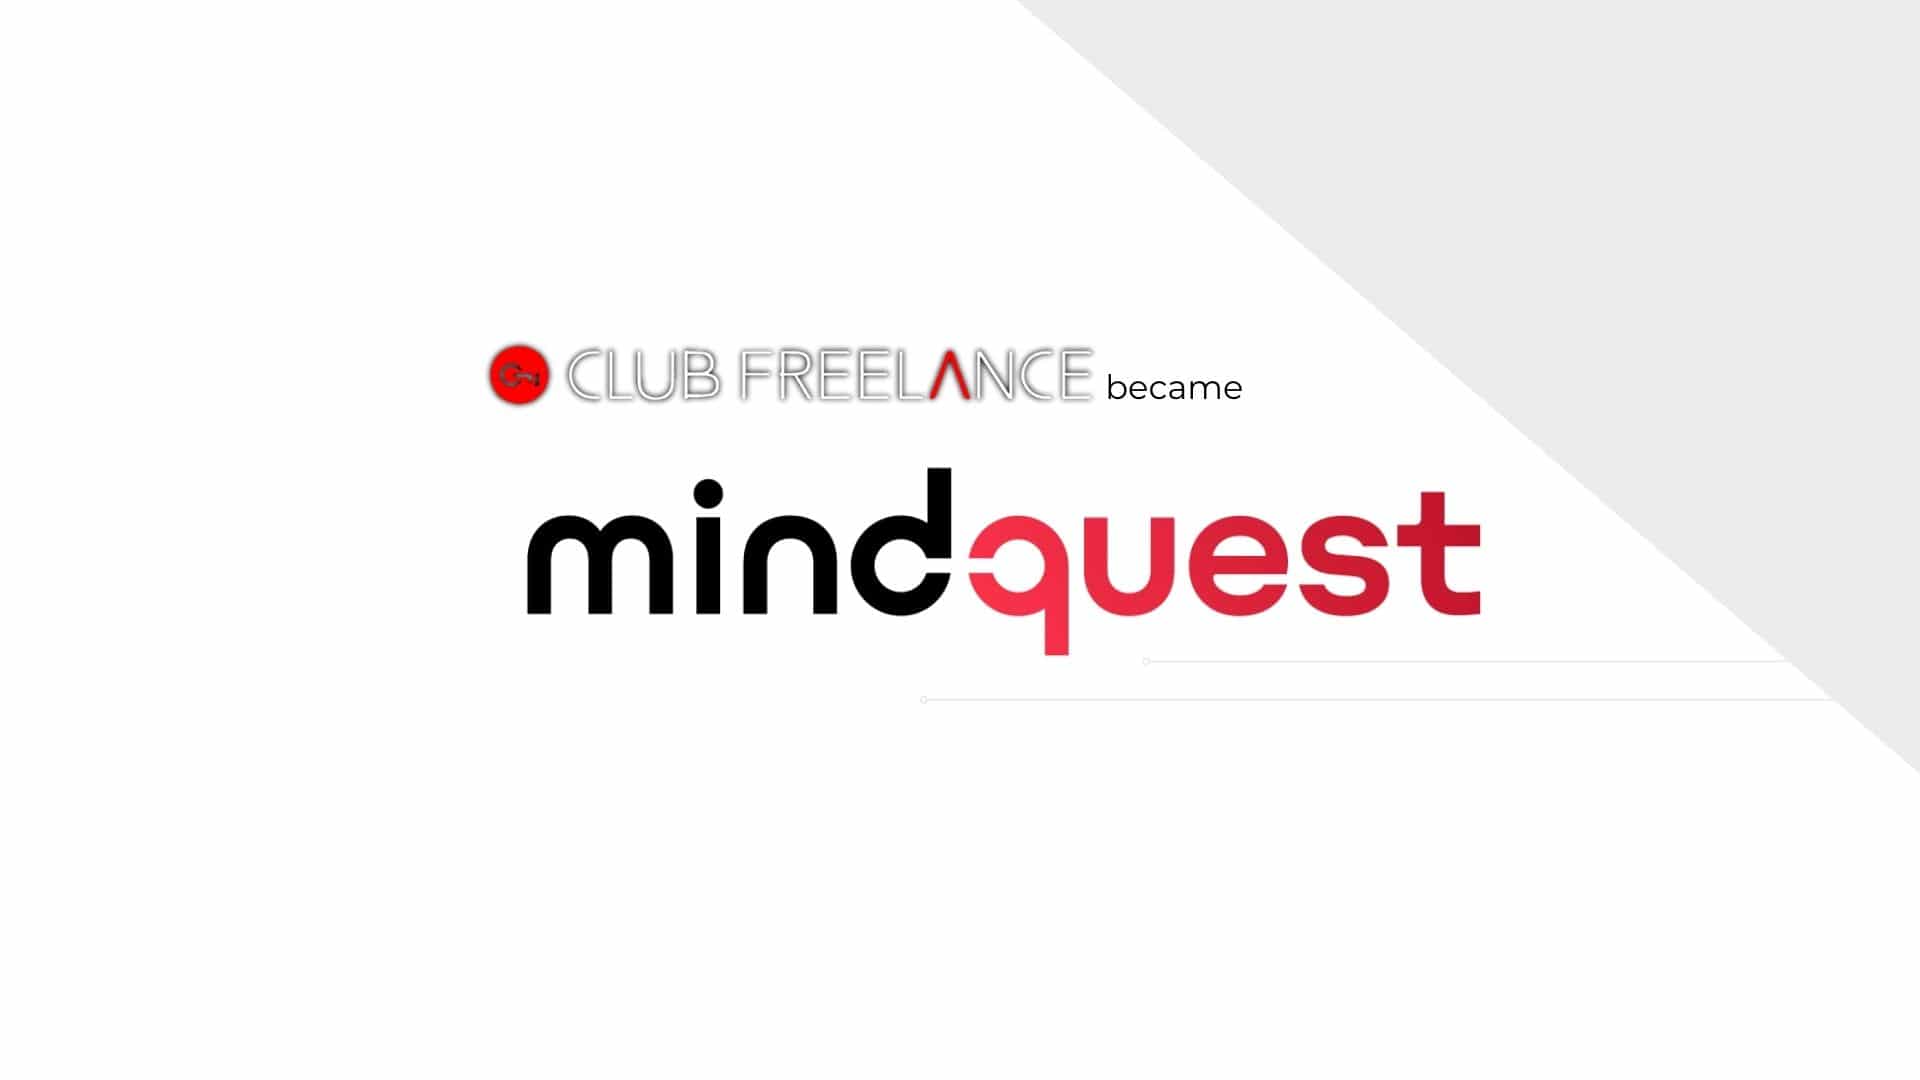 Club-Freelance became Mindquest: the reason behind this choice cover